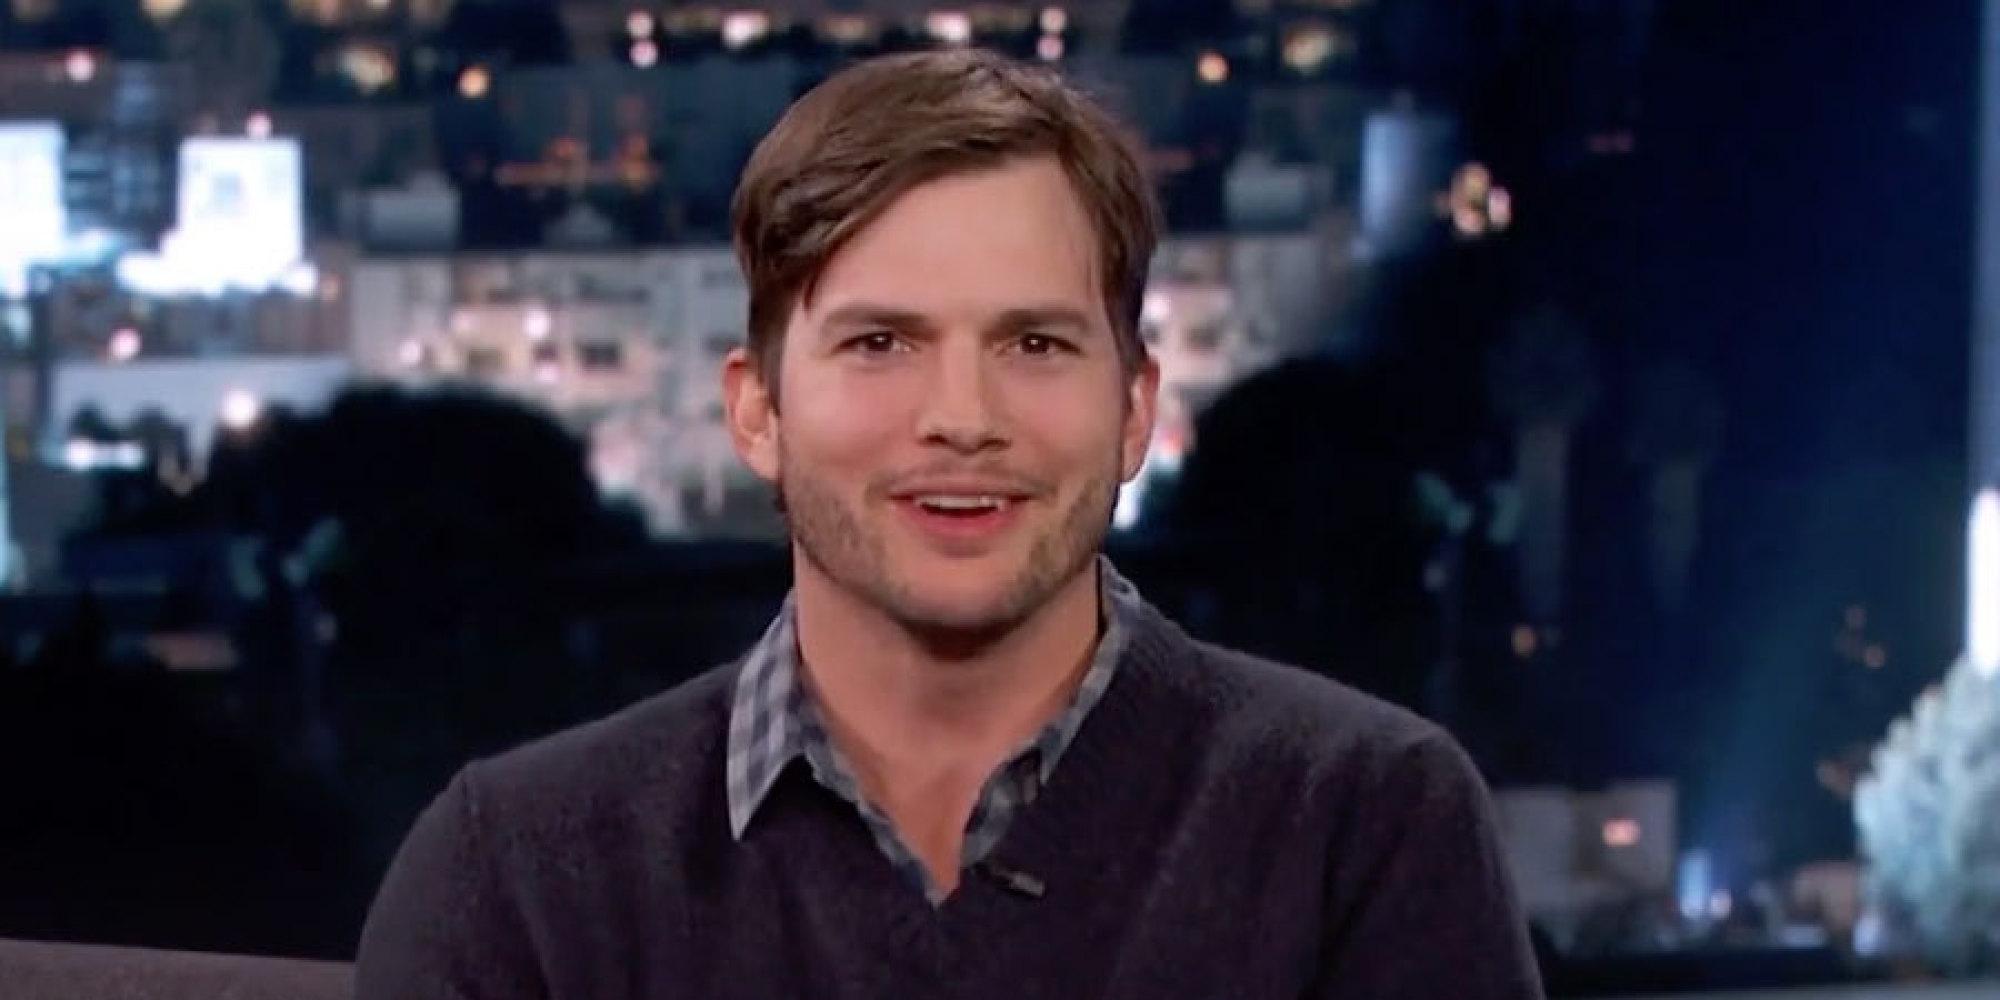 Happy birthday to Ashton Kutcher ! What would you wish the A-list actor today? 